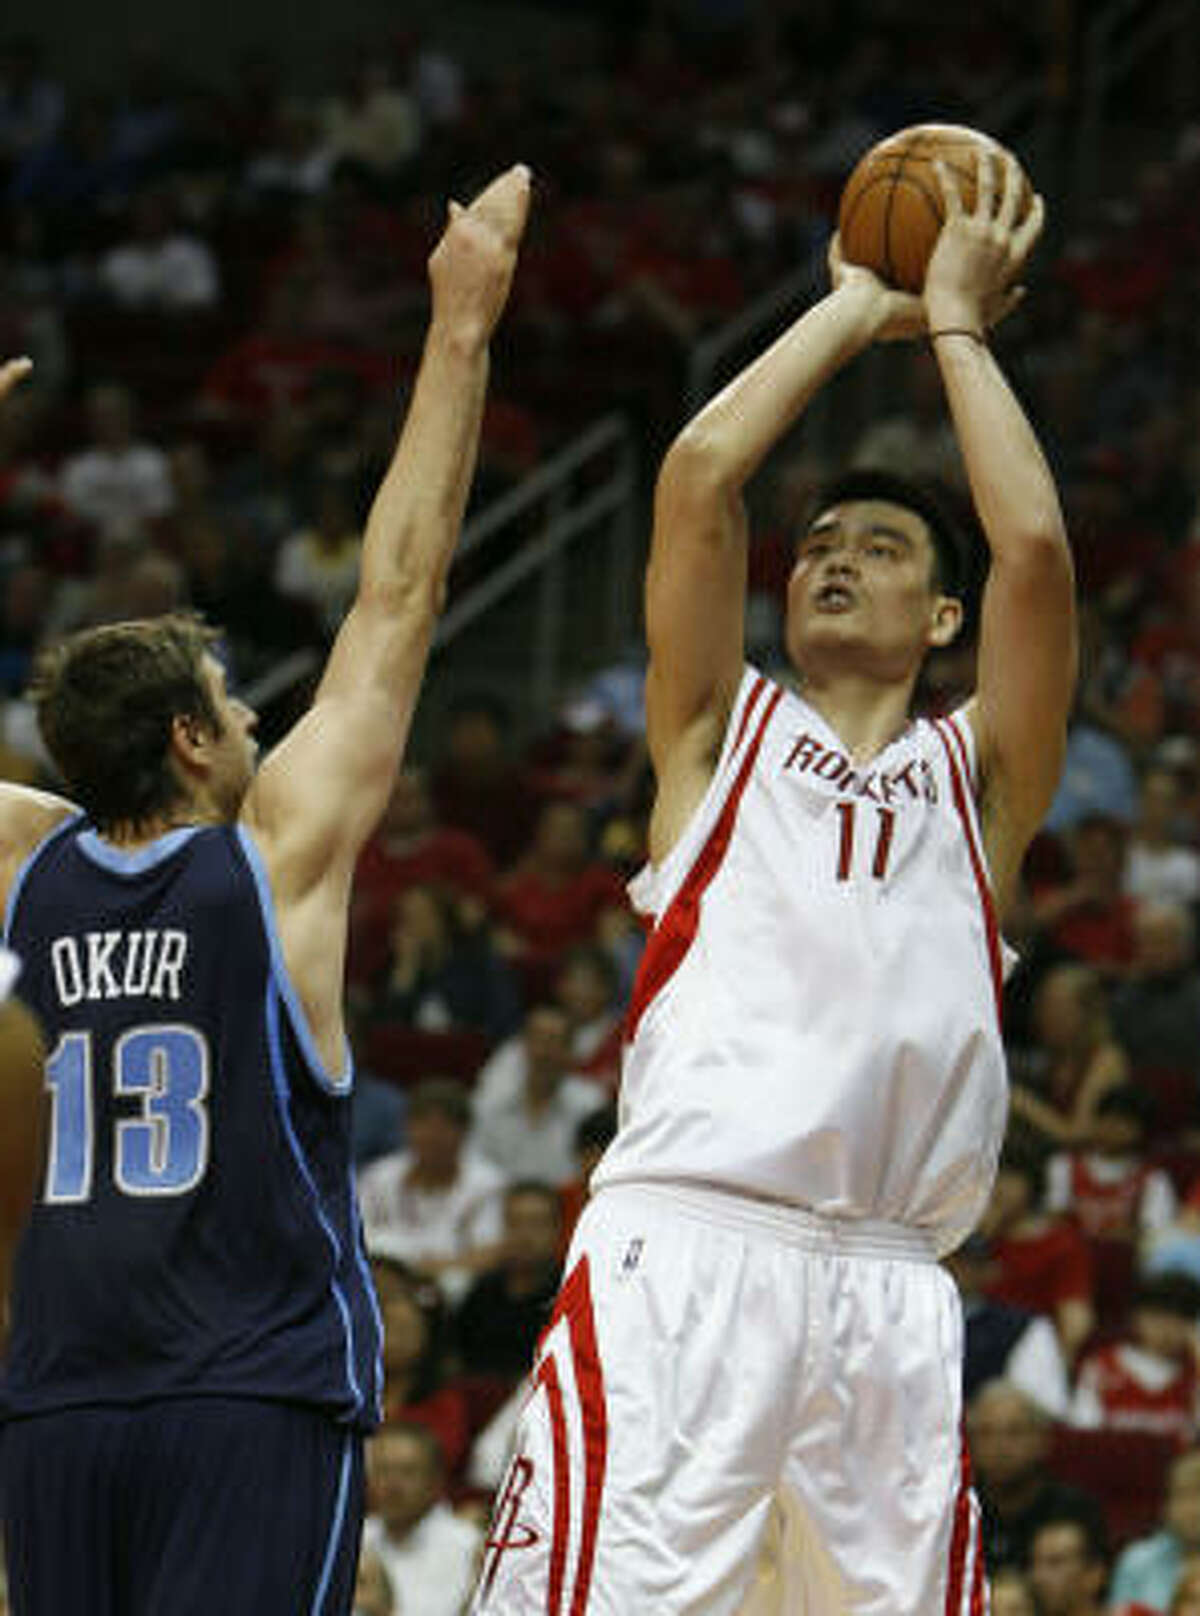 Yao Ming had 28 points to six for Jazz center Mehmut Okur.